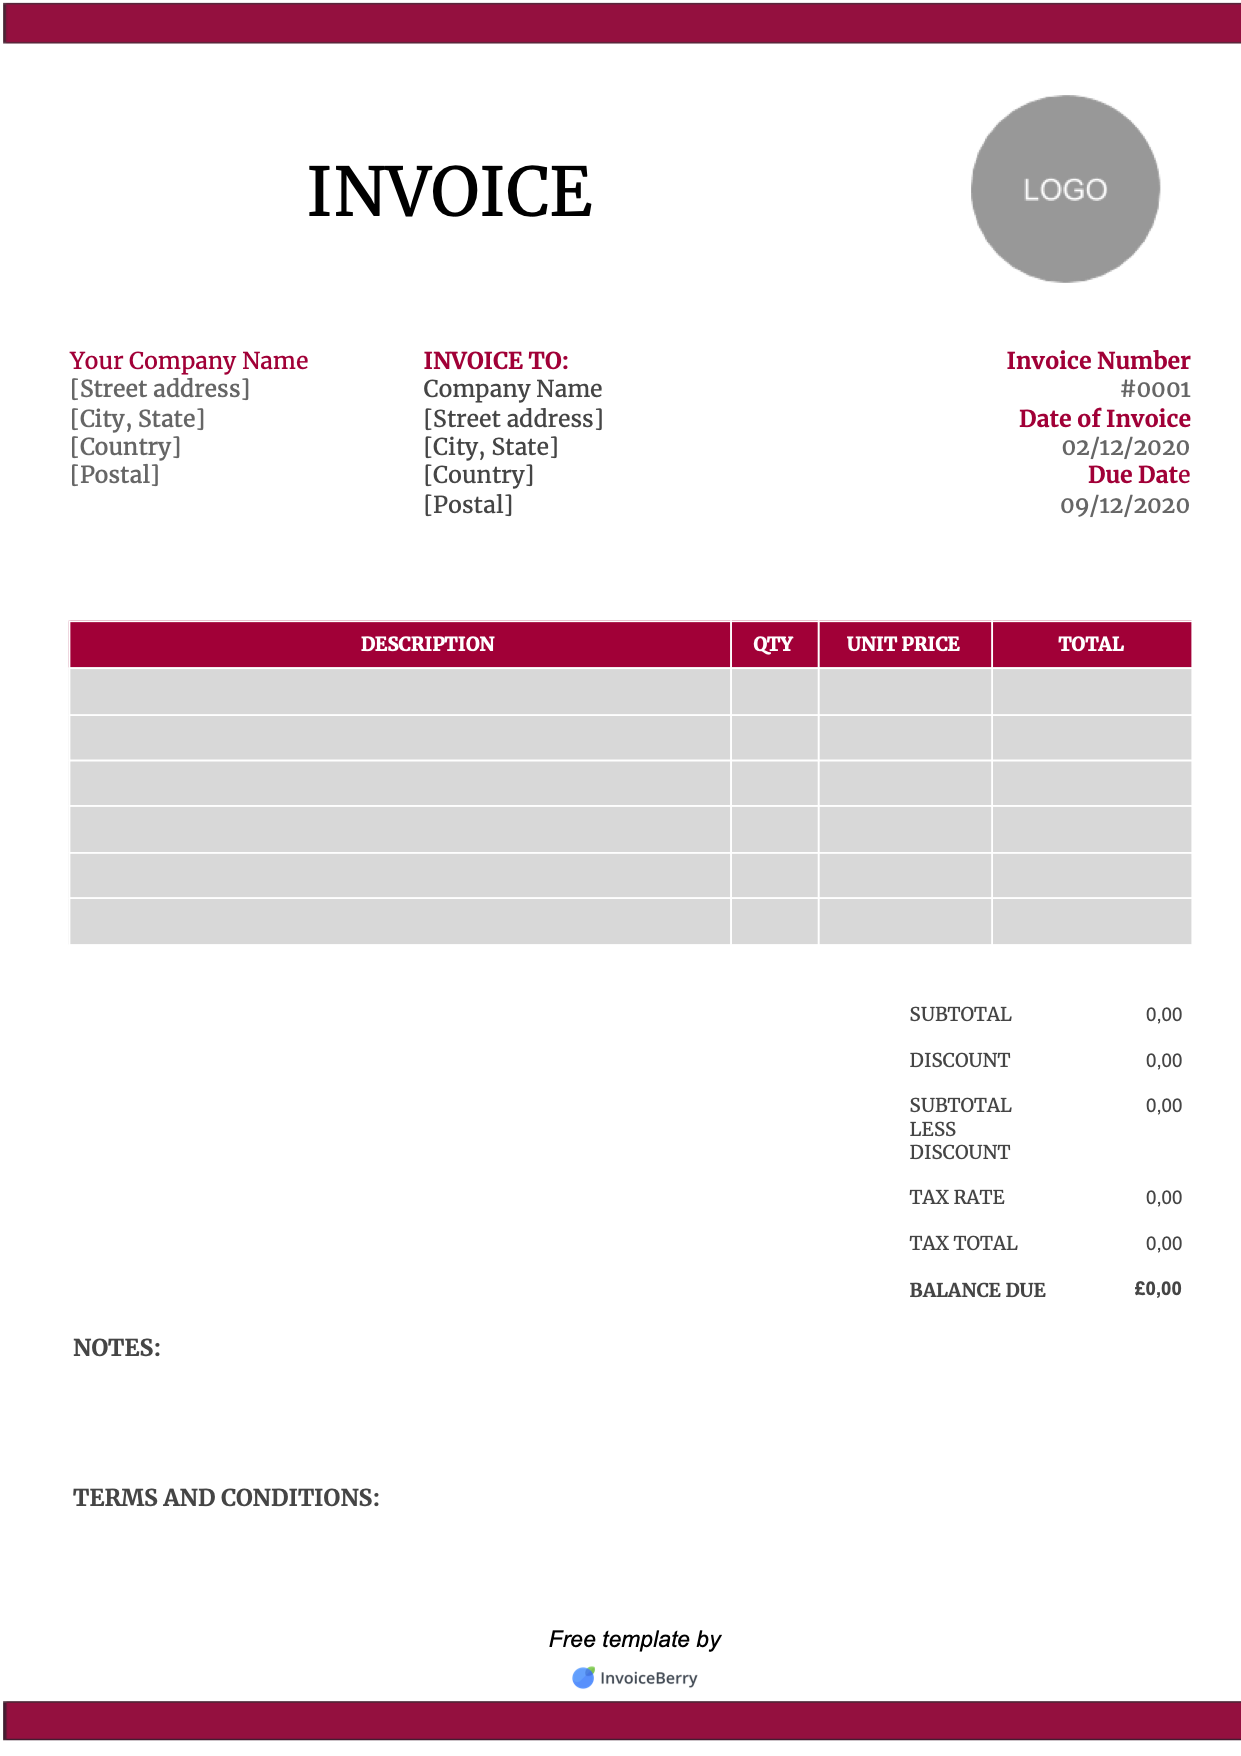 Free UK Invoice Template Sample #20 Download  InvoiceBerry With Business Invoice Template Uk